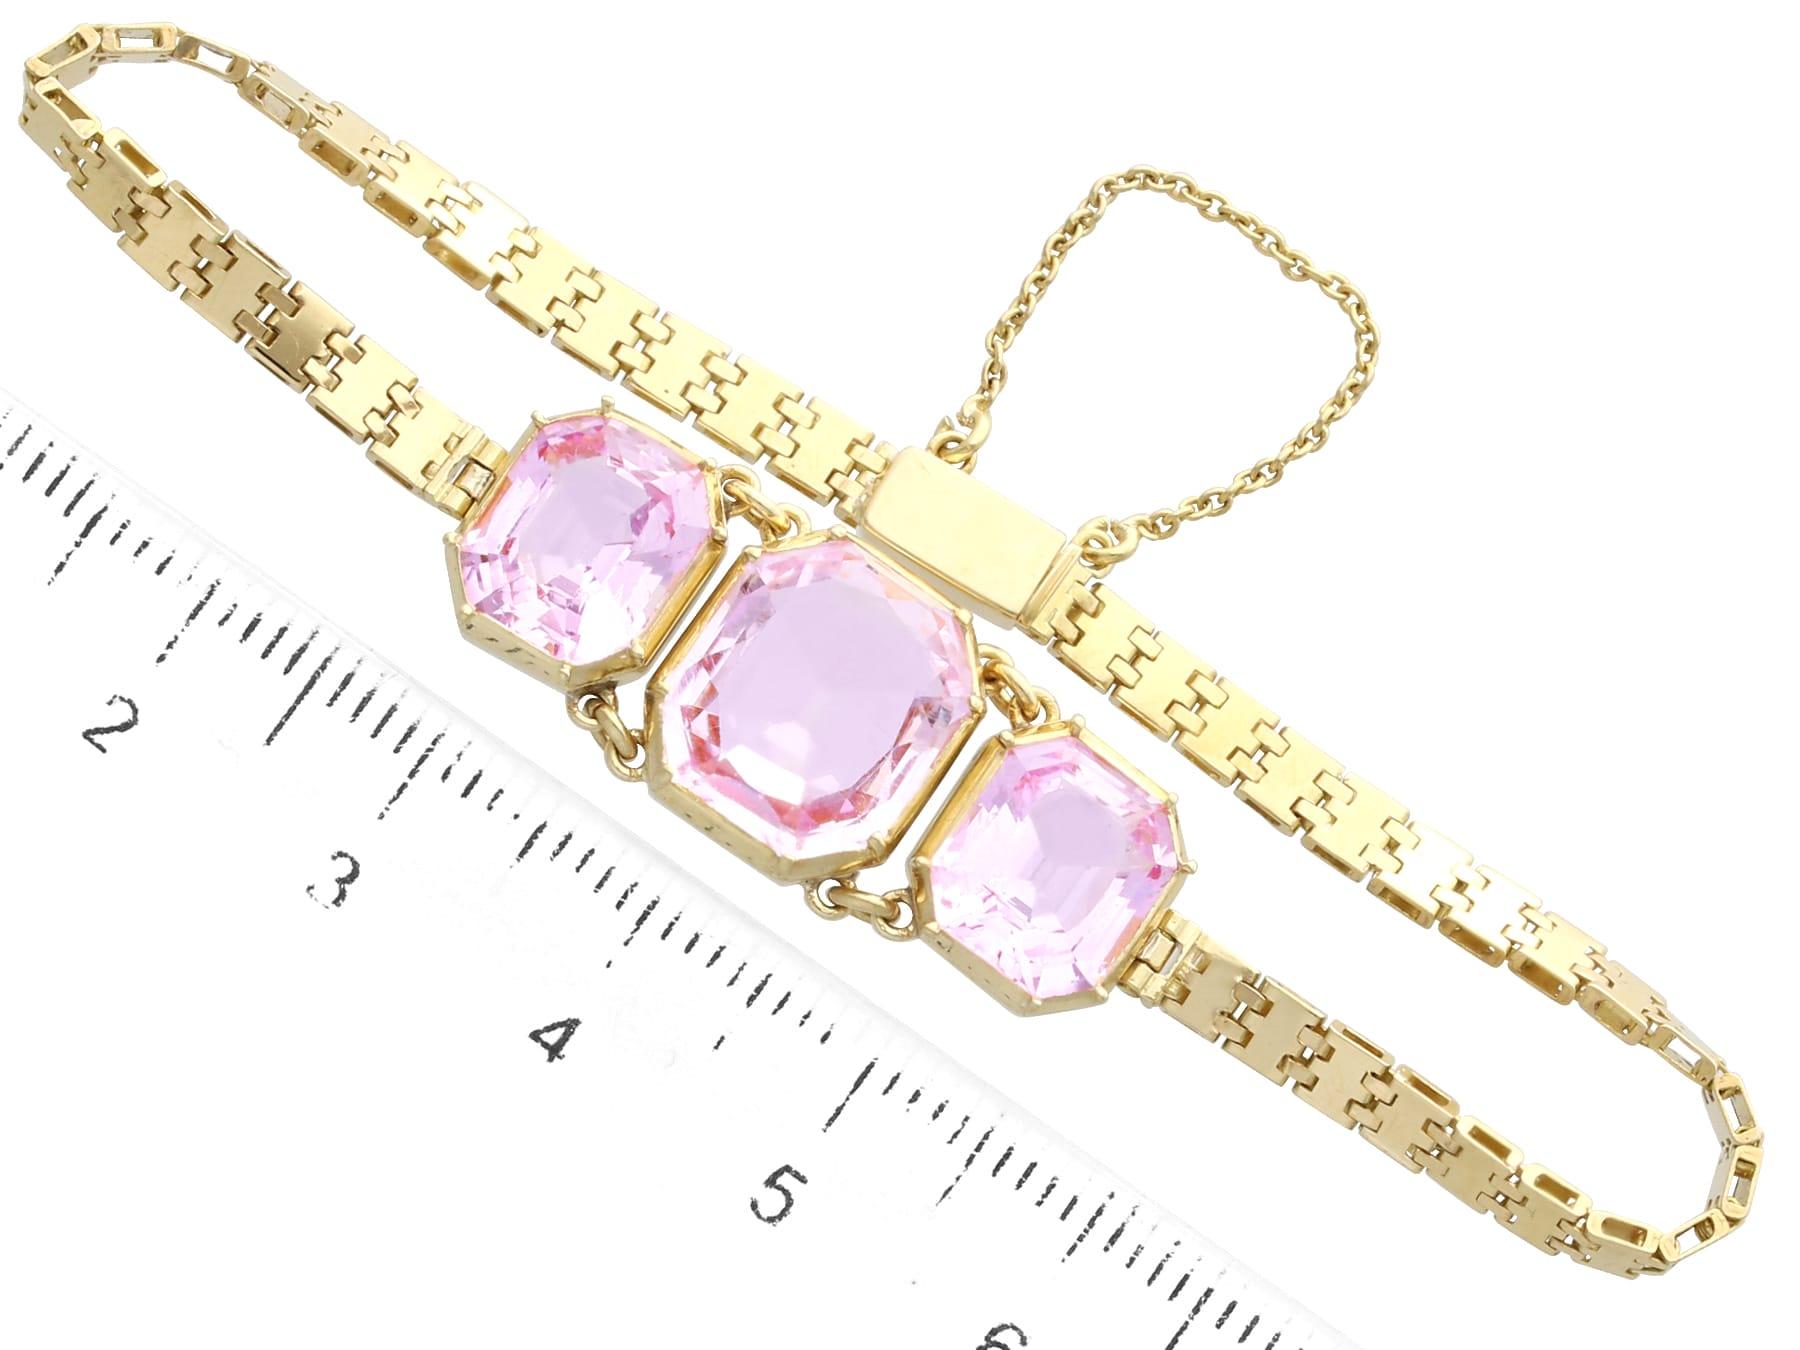 Antique 13.20Ct Pink Topaz and 18k Yellow Gold Bracelet Circa 1840 For Sale 2